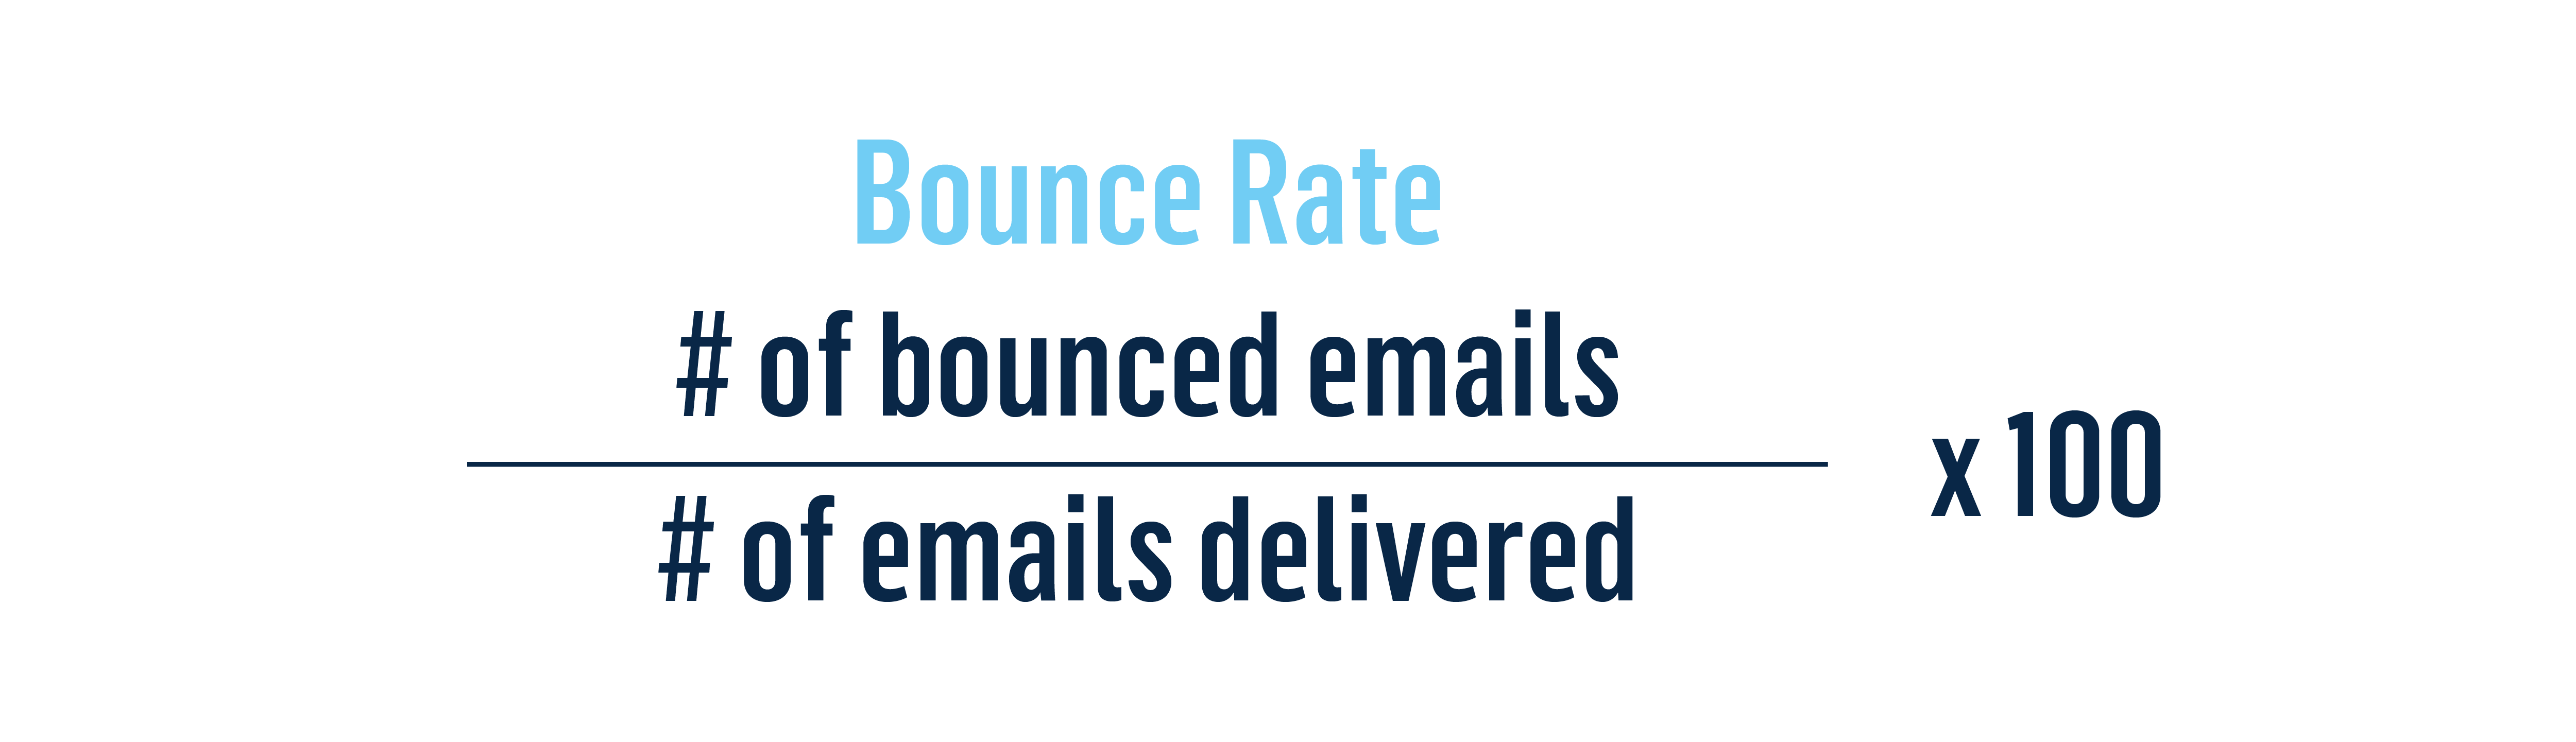 # of bounced emails / # of emails delivered x 100